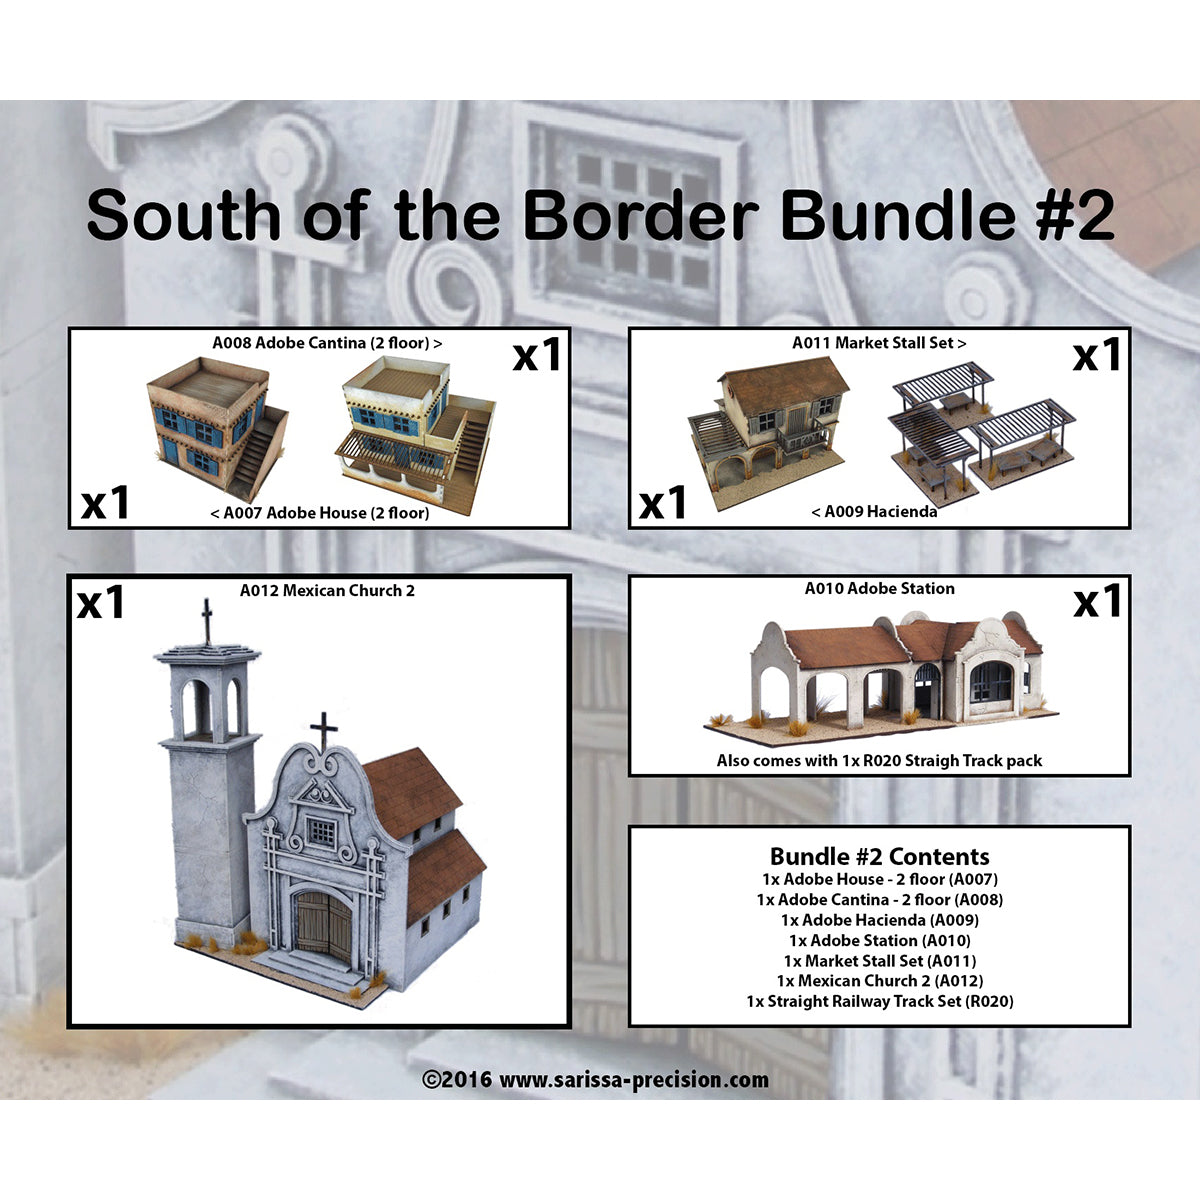 South of the Border Bundle #2